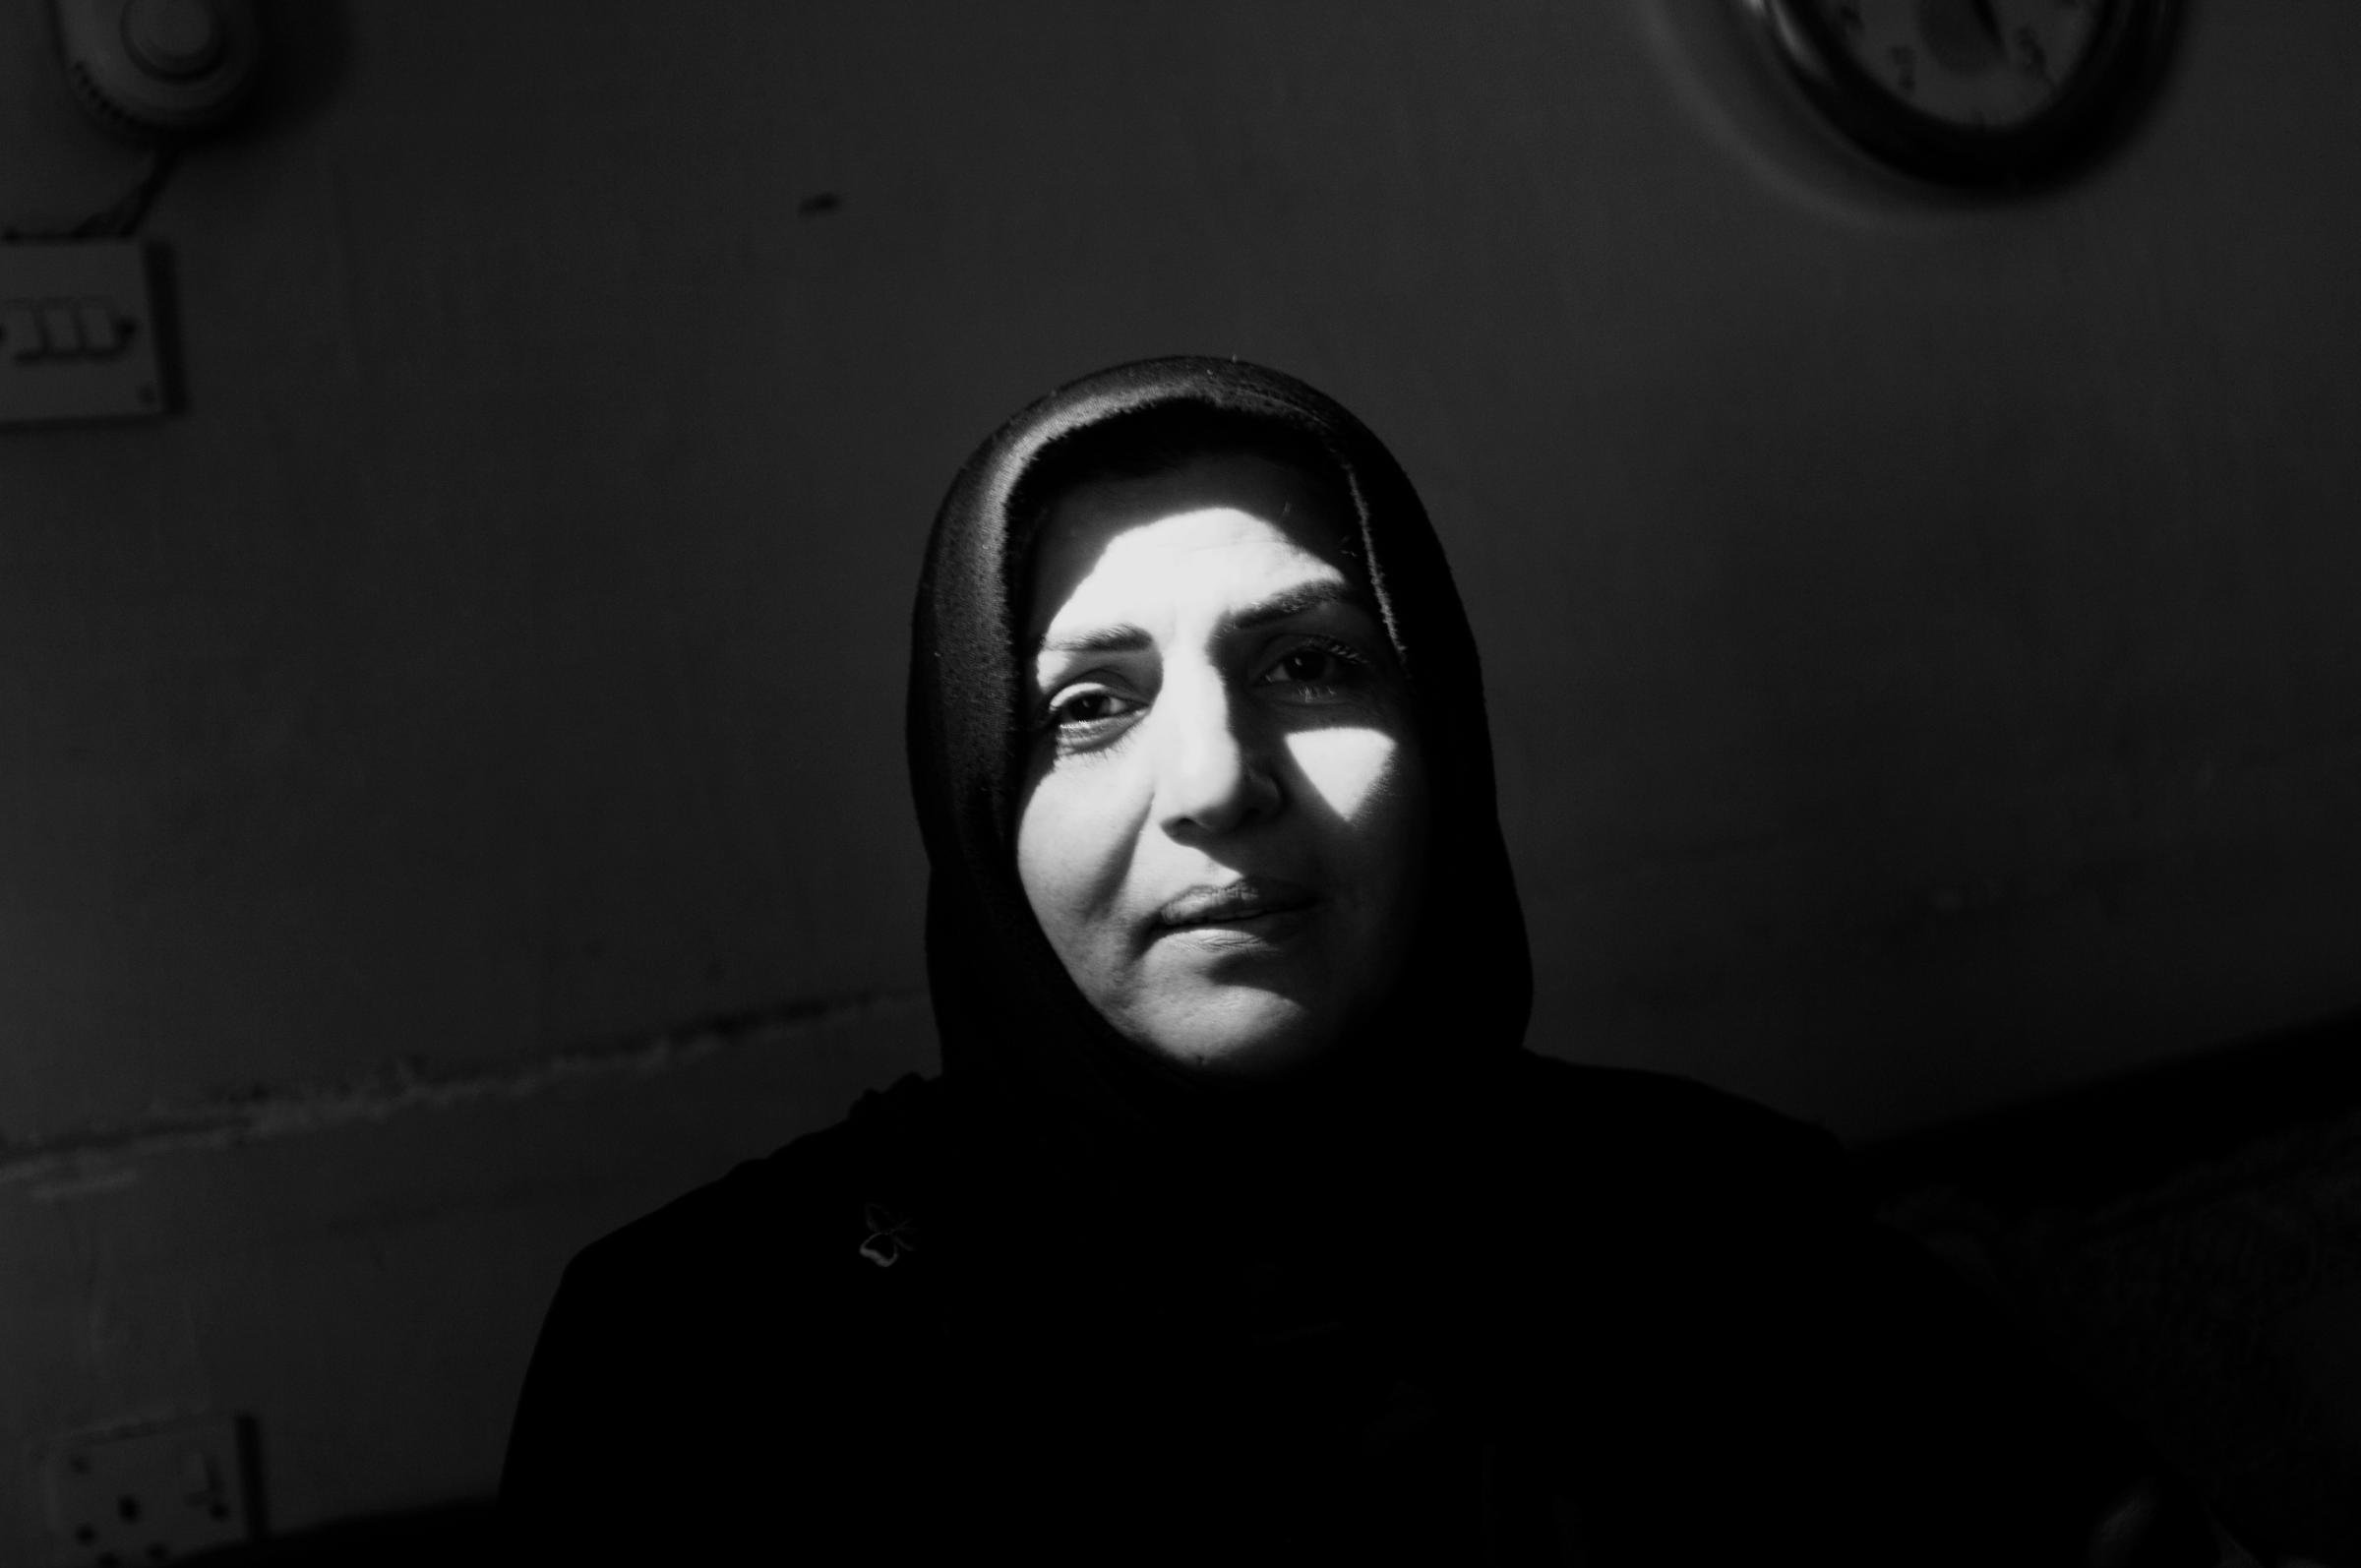 A Shi'ite woman in her home, Baghdad Feb.15, 2007. Where Iraqis of different faiths once mixed and lived next to each other, as the country erupted into civil war, people of different faiths rarely associated with former neighbors.